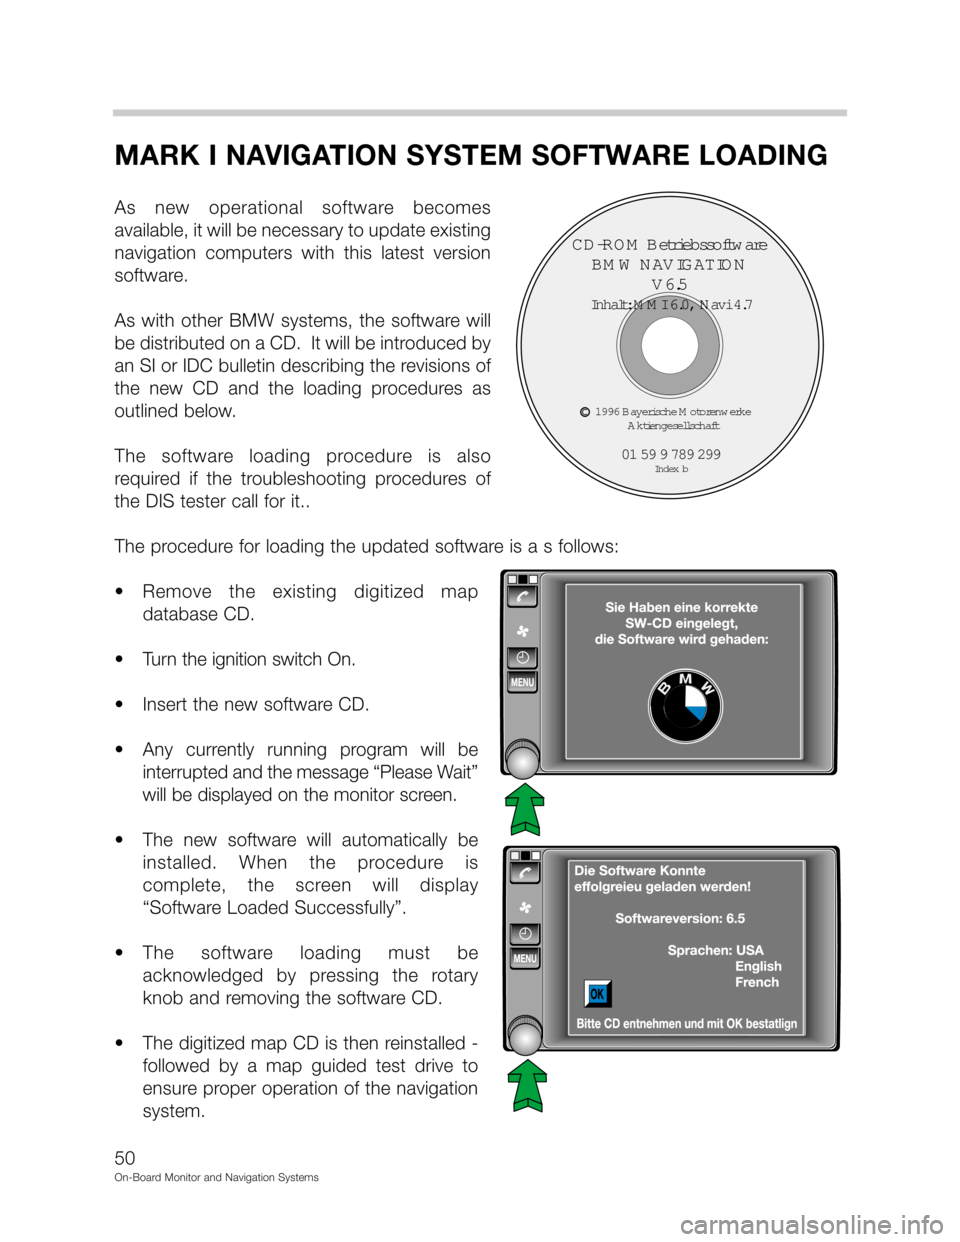 BMW 5 SERIES 1998 E39 On Board Monitor System Workshop Manual 	>
4
8

	5@3
8
 
% 

 % 	
&6%




&
 	
 %   &
%
 